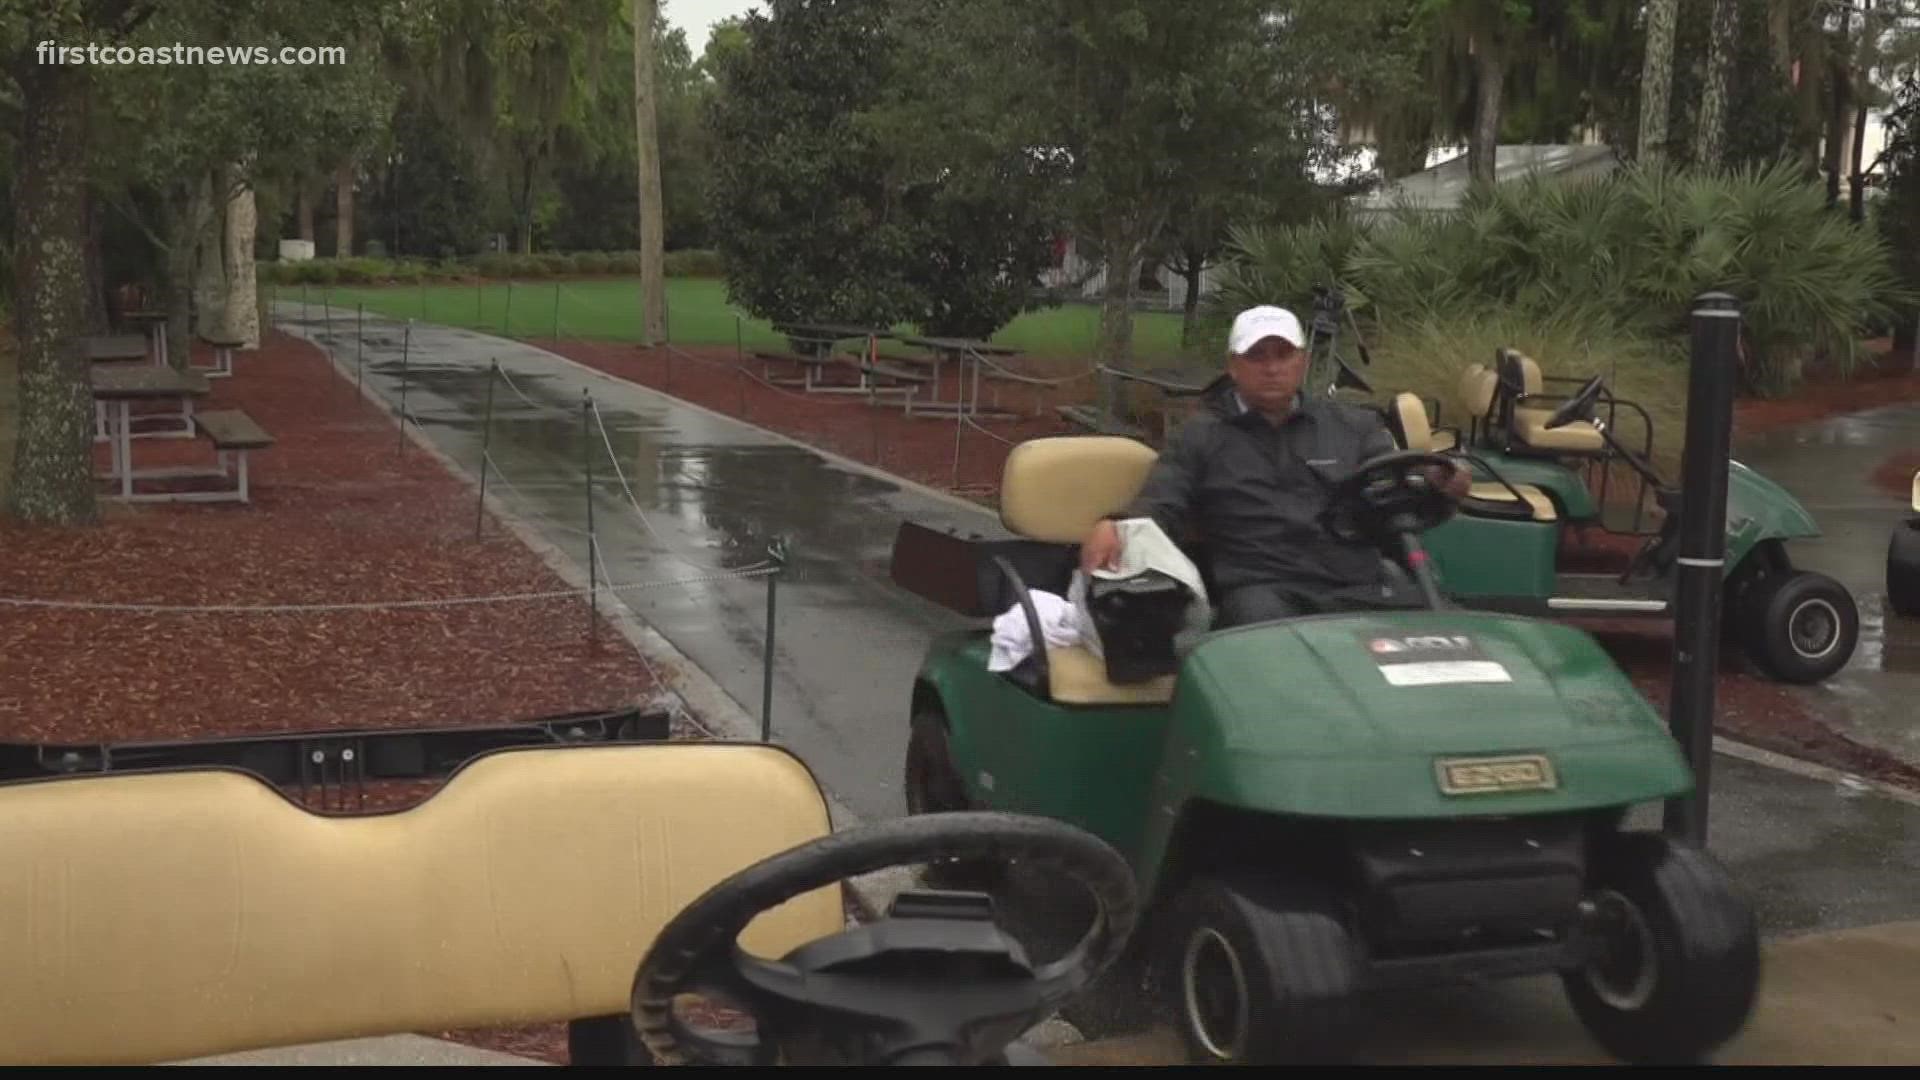 The golf course was made for drainage. Players' Executive Director Jared Rice says golfers told him it's in the best condition they've ever seen.